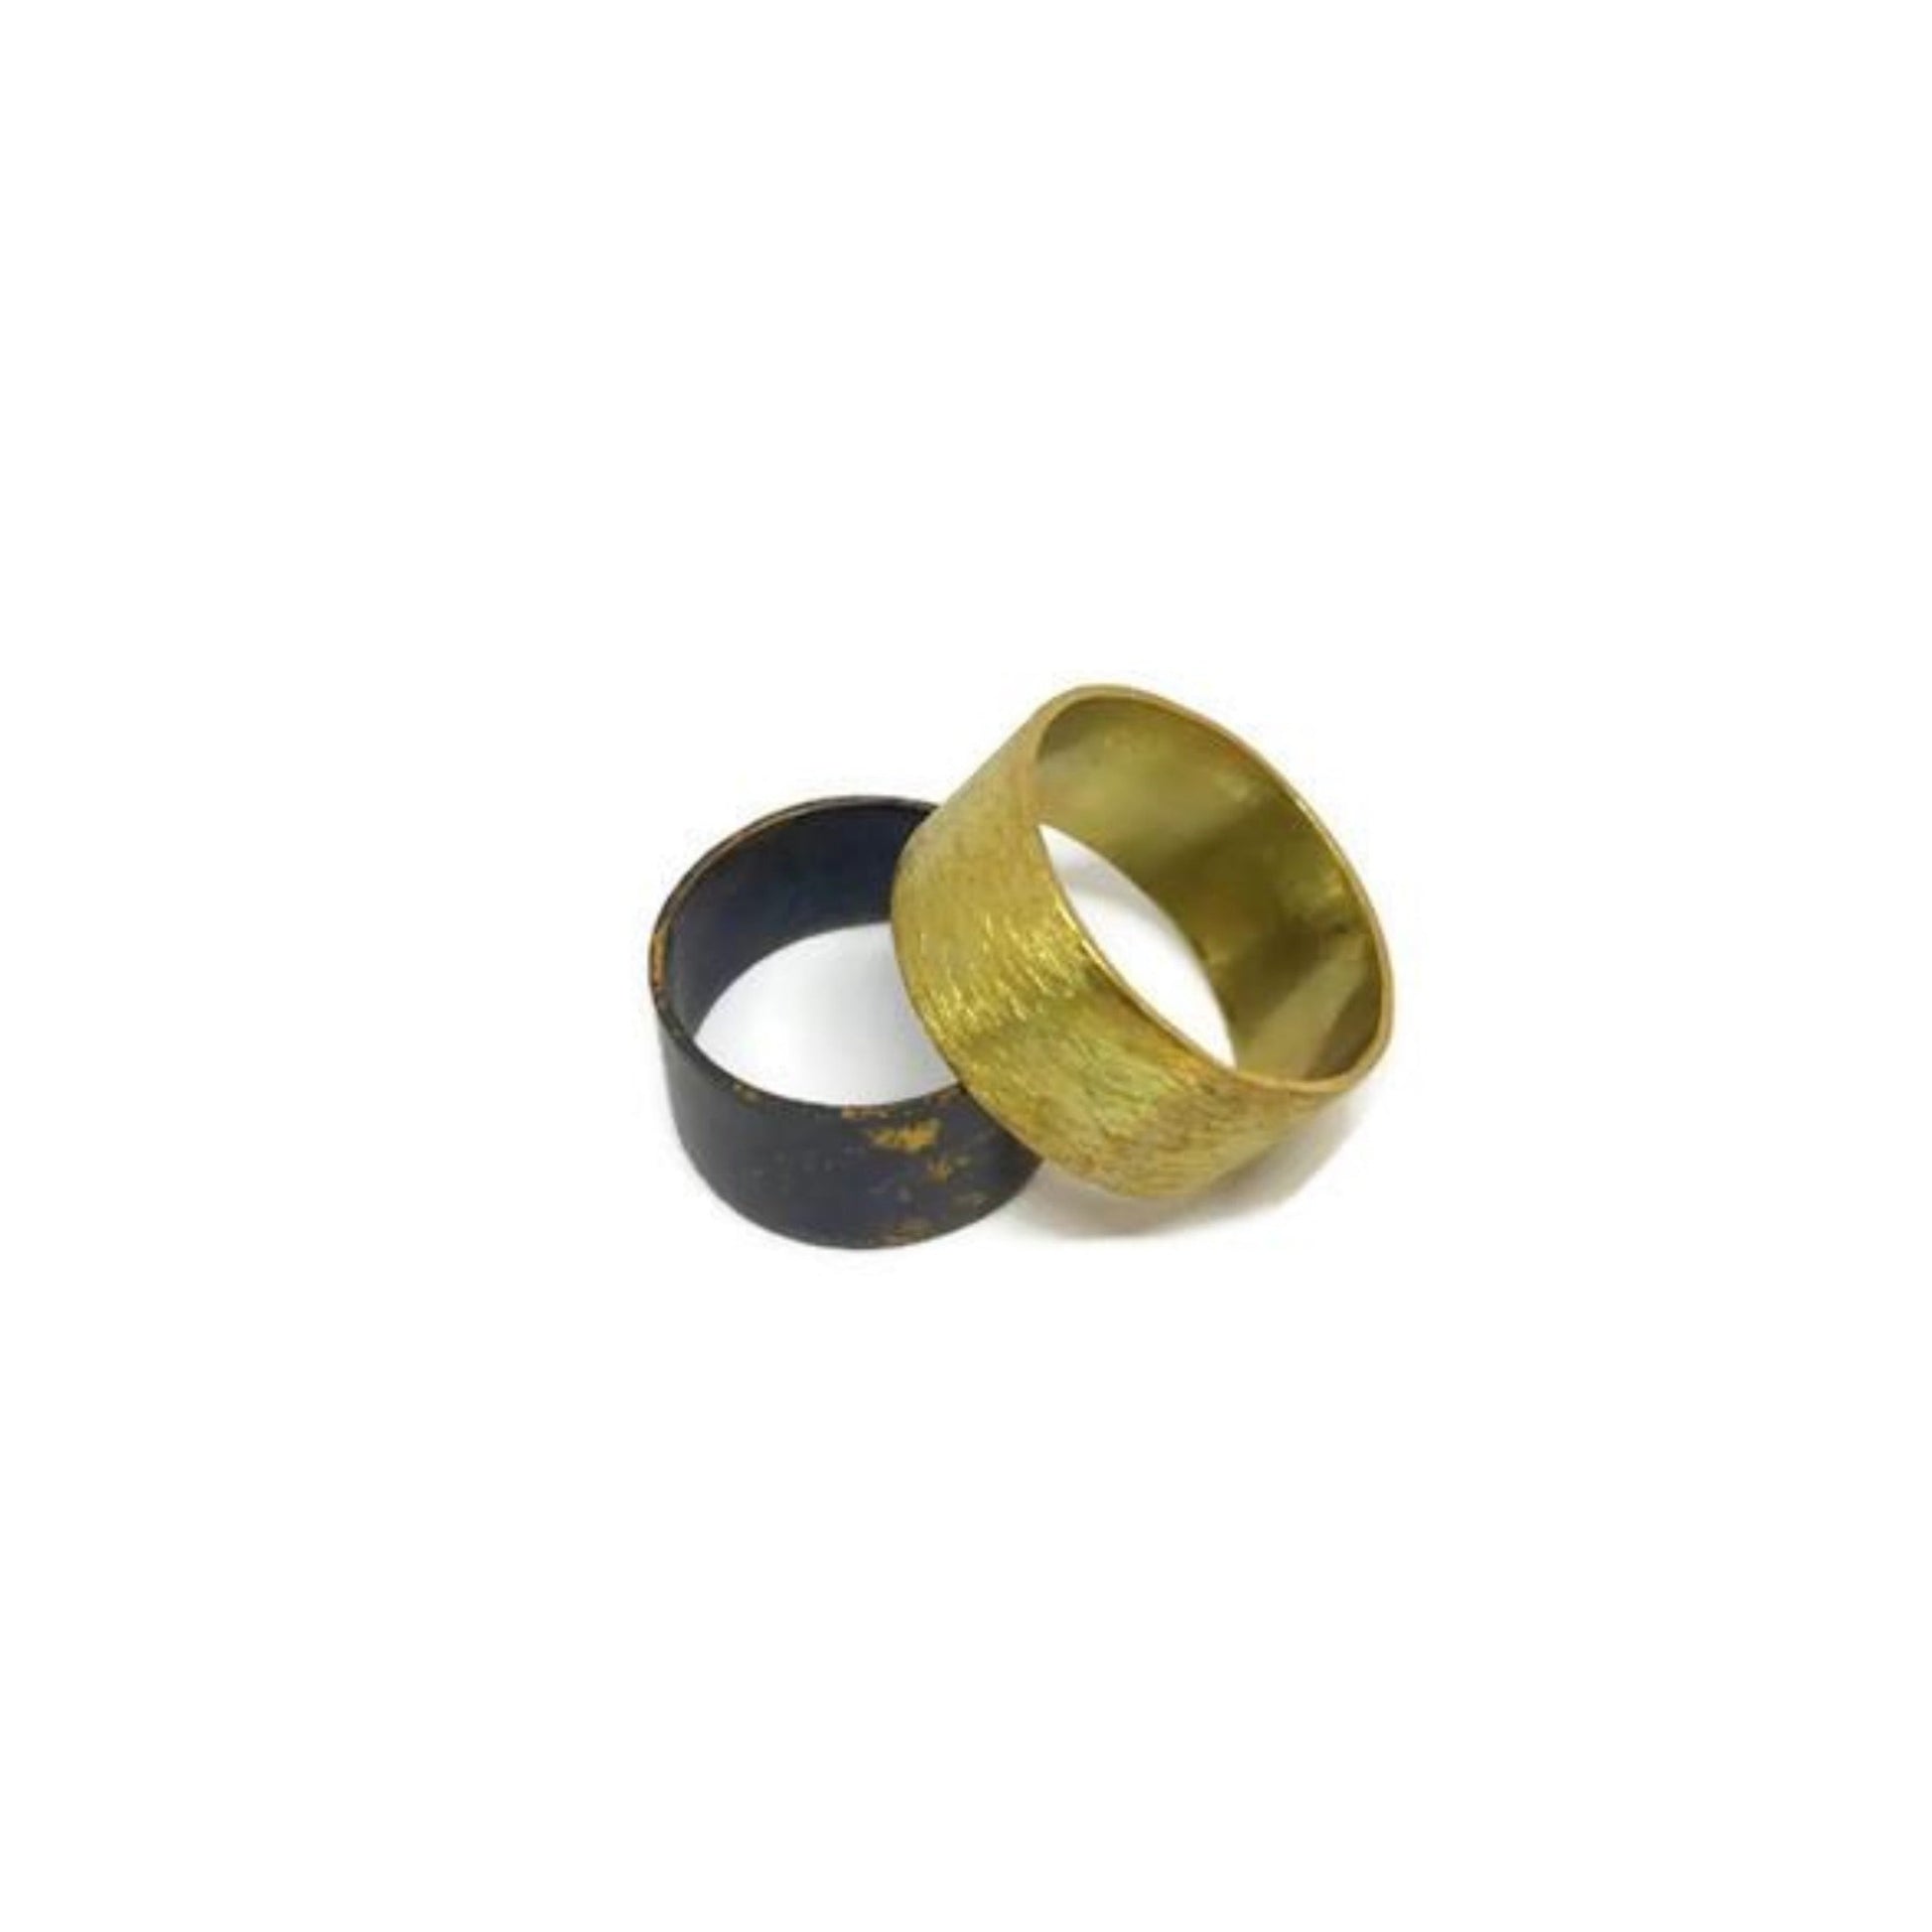 Oxidised brass earrings | Yellow - Black Rolling Ring - CURIUDO